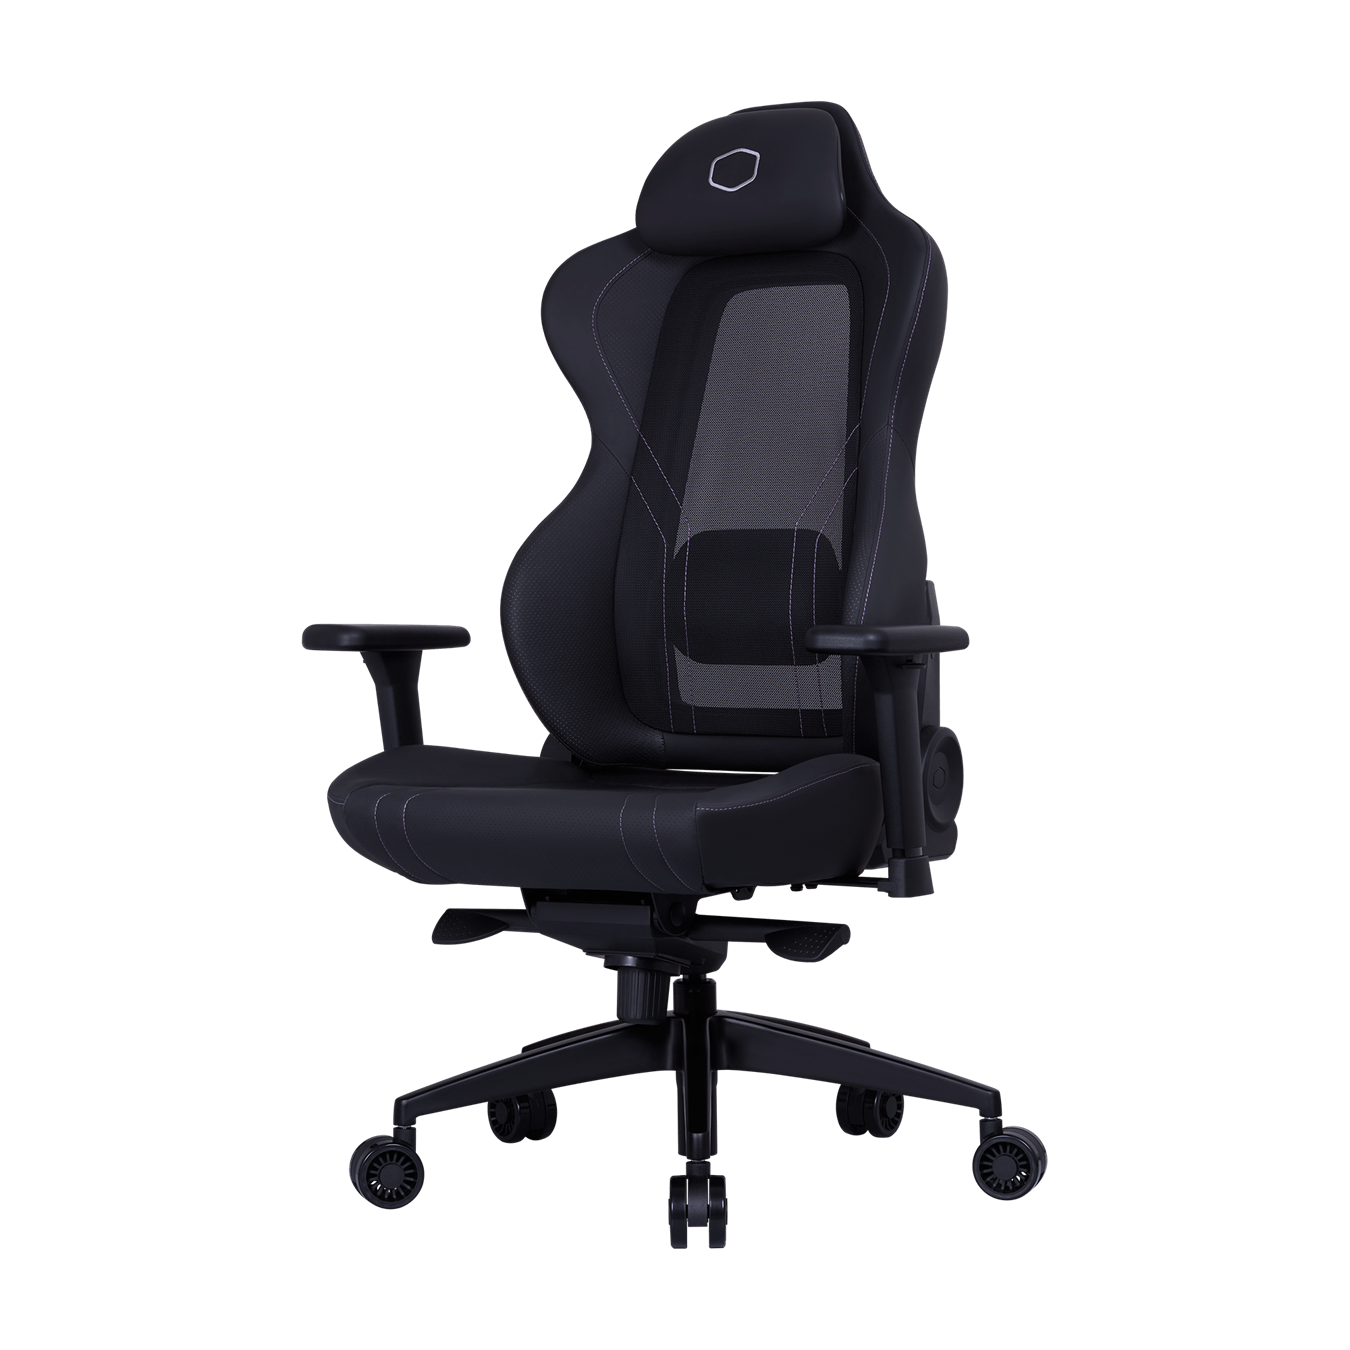 Hybrid 1 Ergo-Gaming Chair - Normal 45 Degree Angle Left View